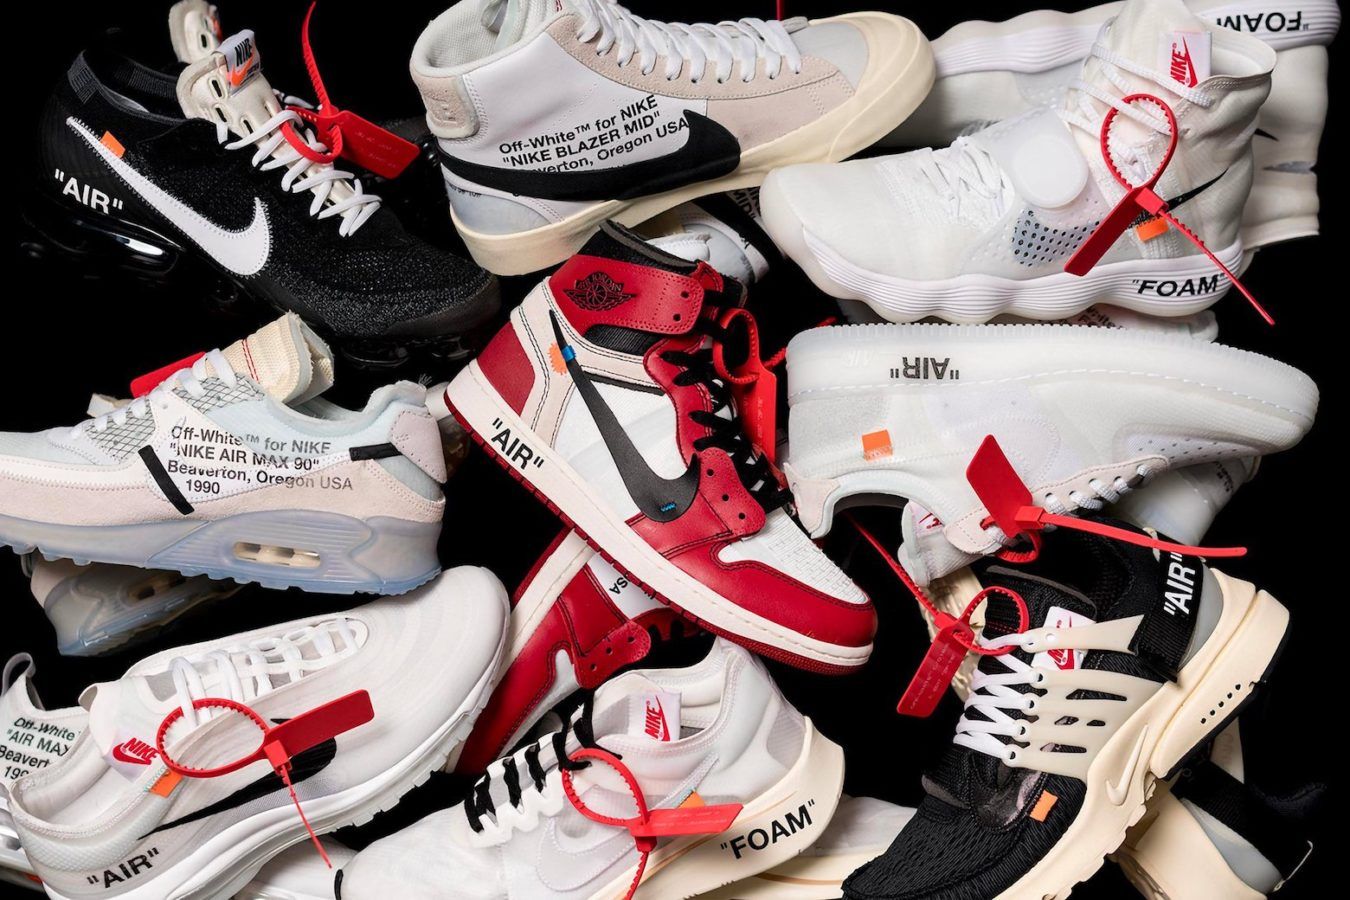 8 iconic sneakers by Virgil Abloh that redefined streetwear, fashion and art